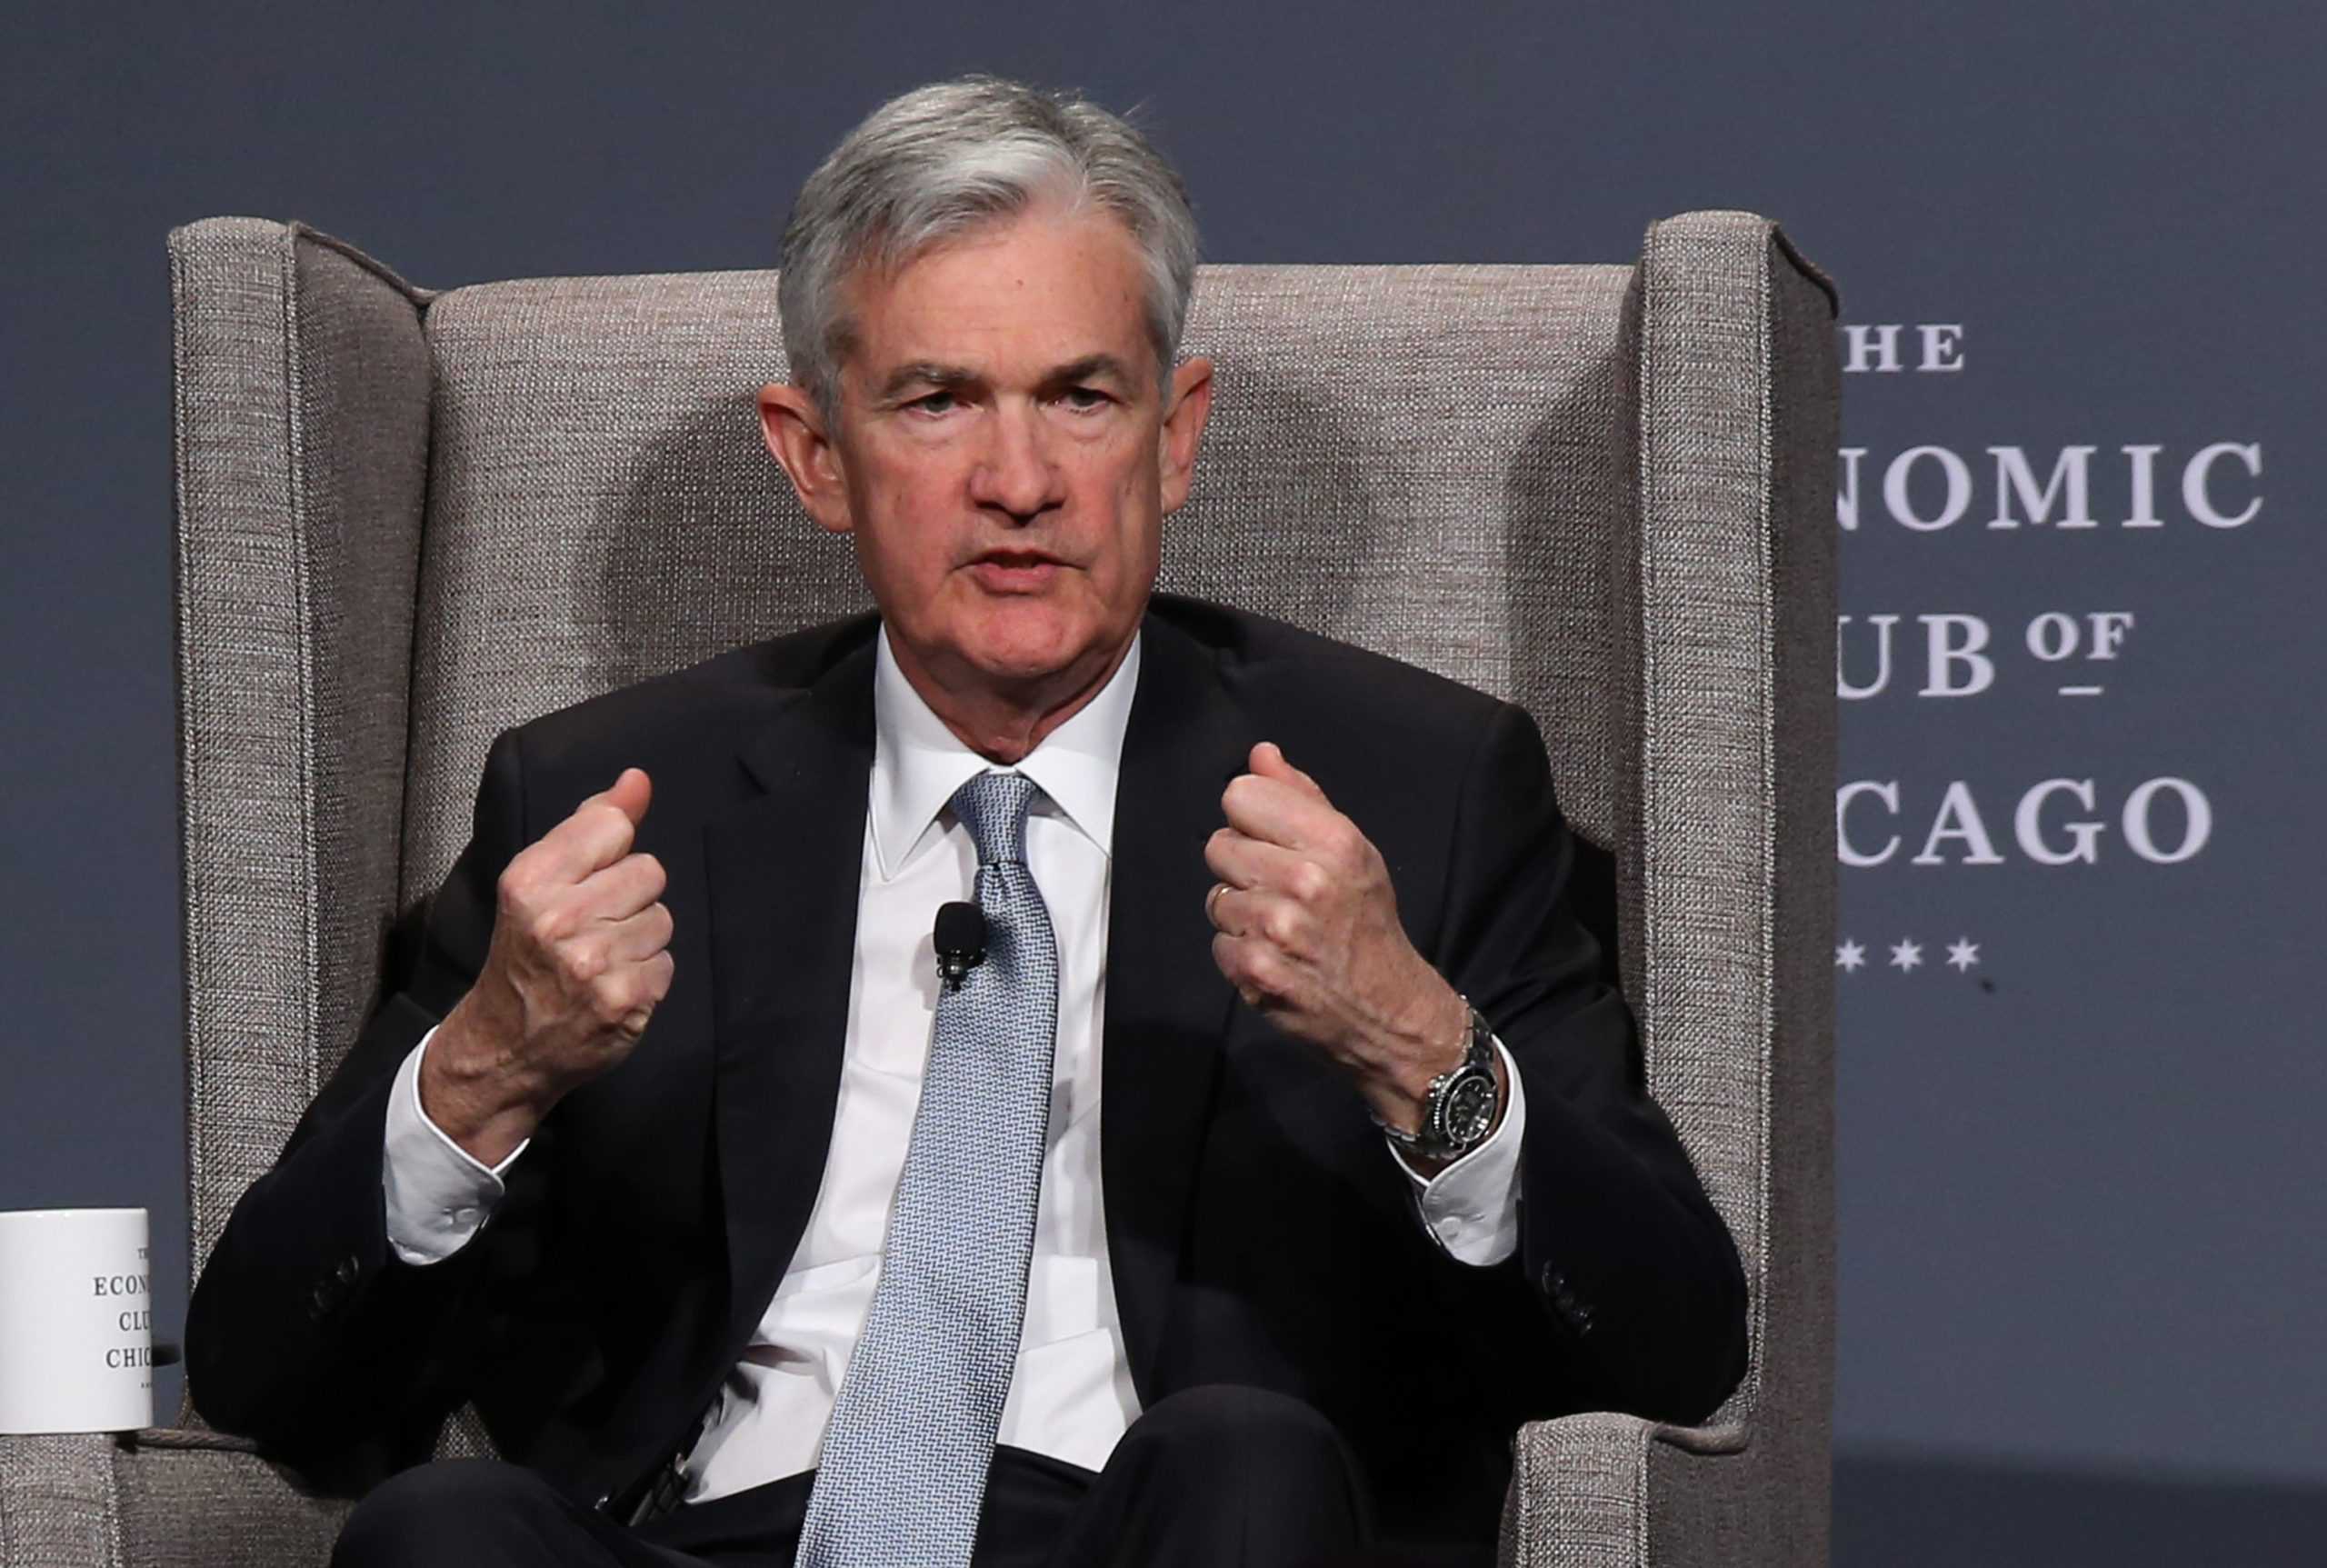 Federal Reserve Chairman Jerome Powell speaks at the Economic Club of Chicago luncheon at the Hilton Chicago on April 6, 2018. (Antonio Perez/Chicago Tribune/TNS)